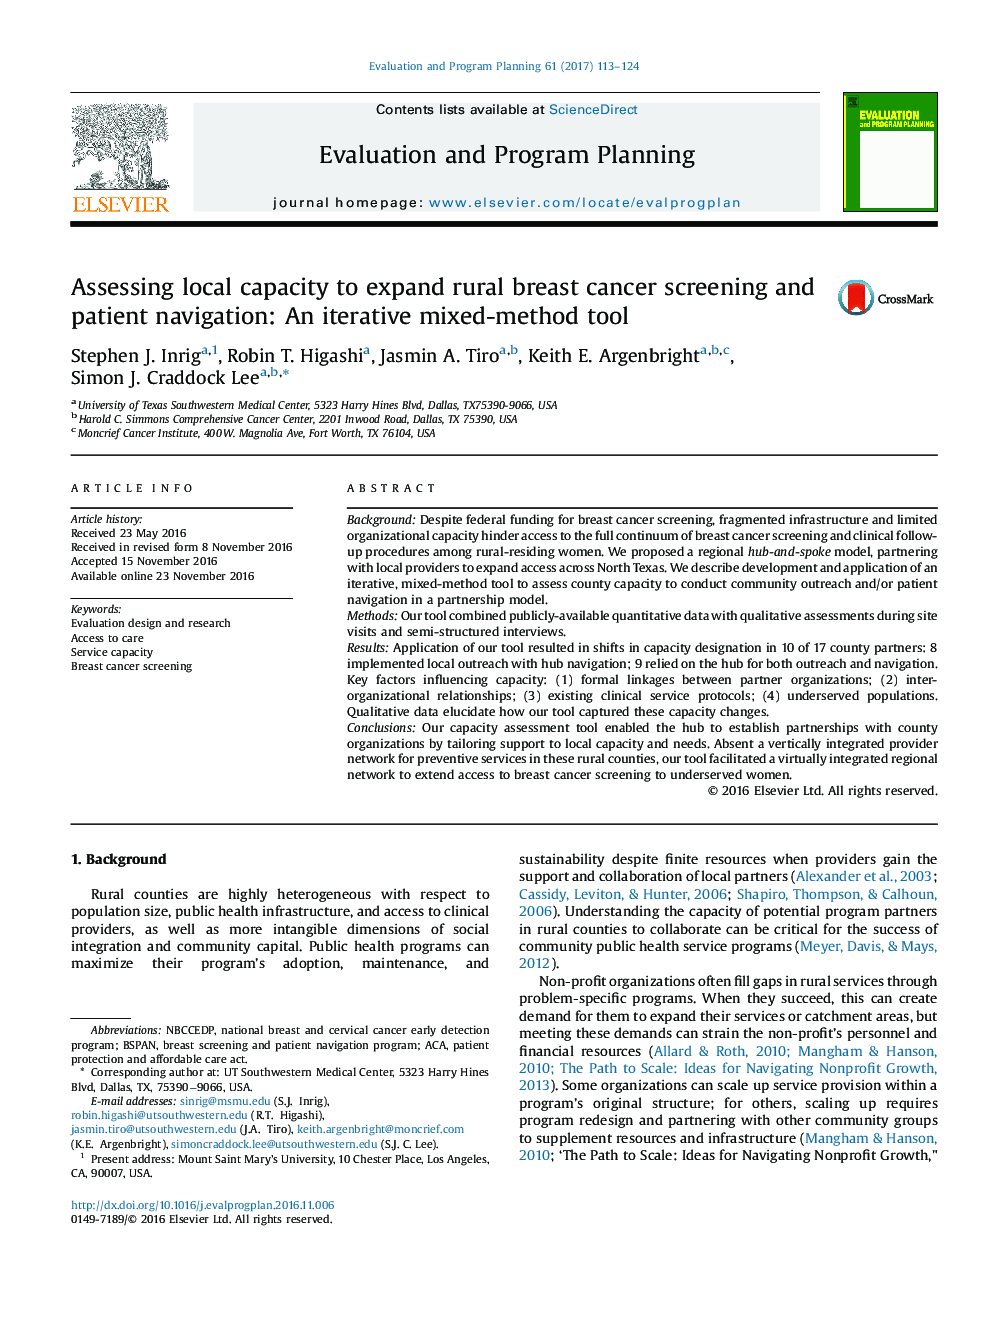 Assessing local capacity to expand rural breast cancer screening and patient navigation: An iterative mixed-method tool